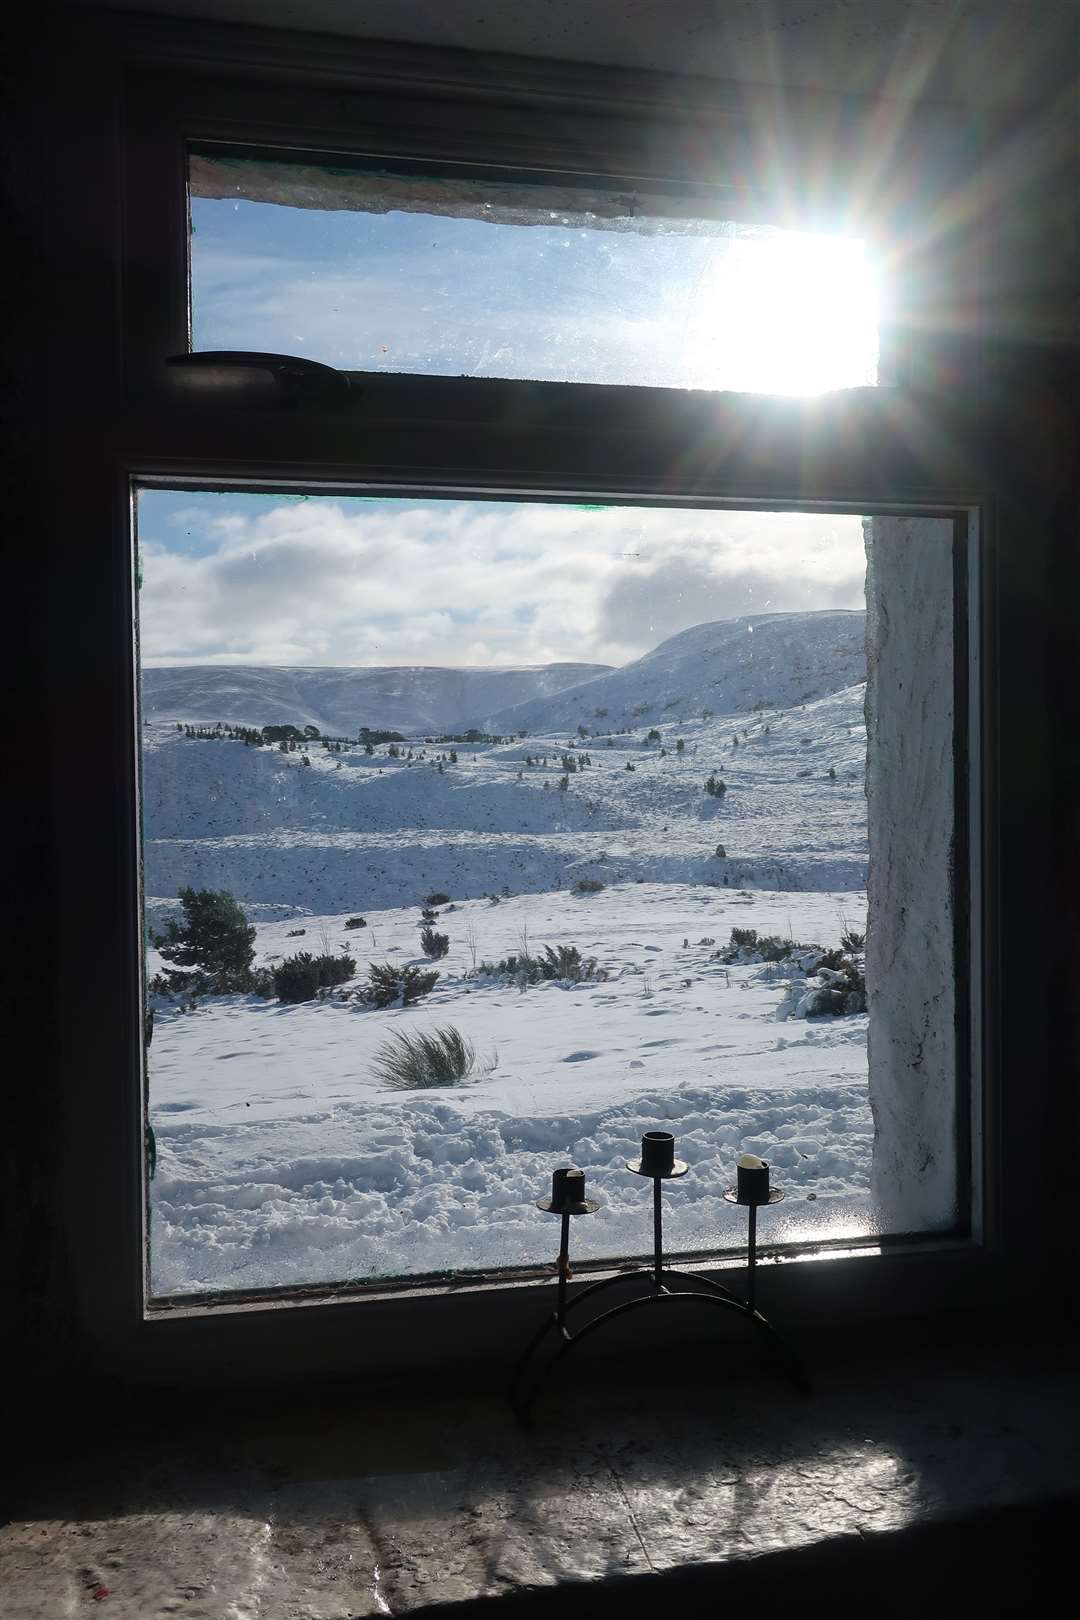 The view from the window of Ryvoan bothy on a winter's day.